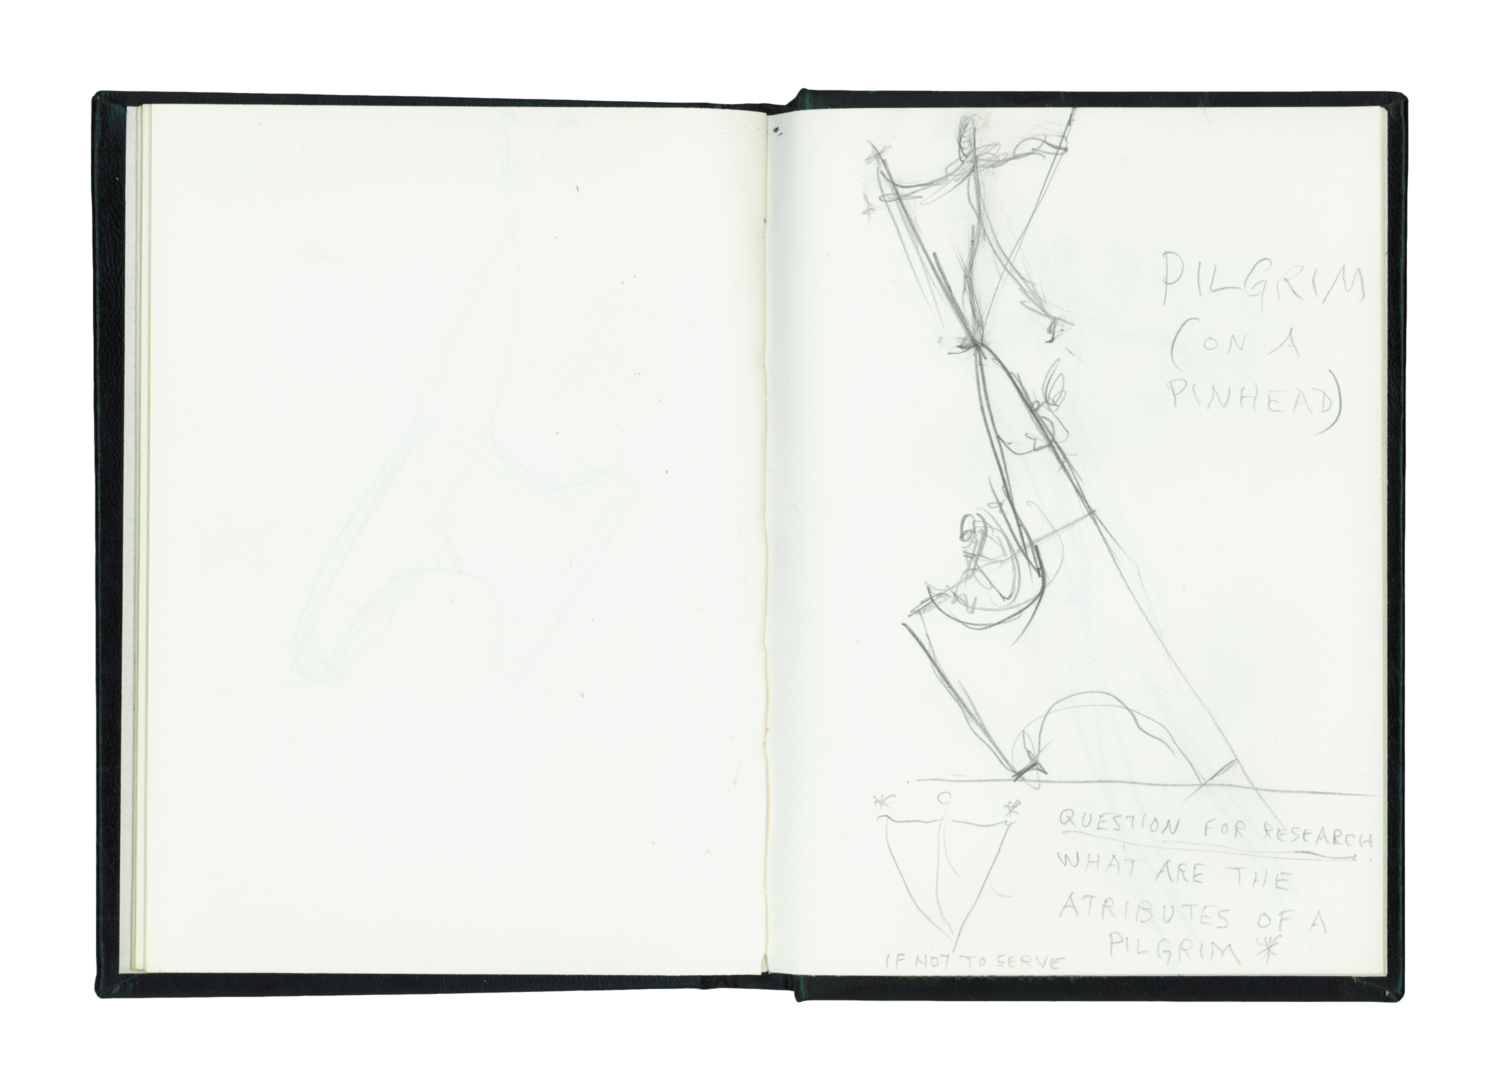 Sketch and notebook (c. 1984)